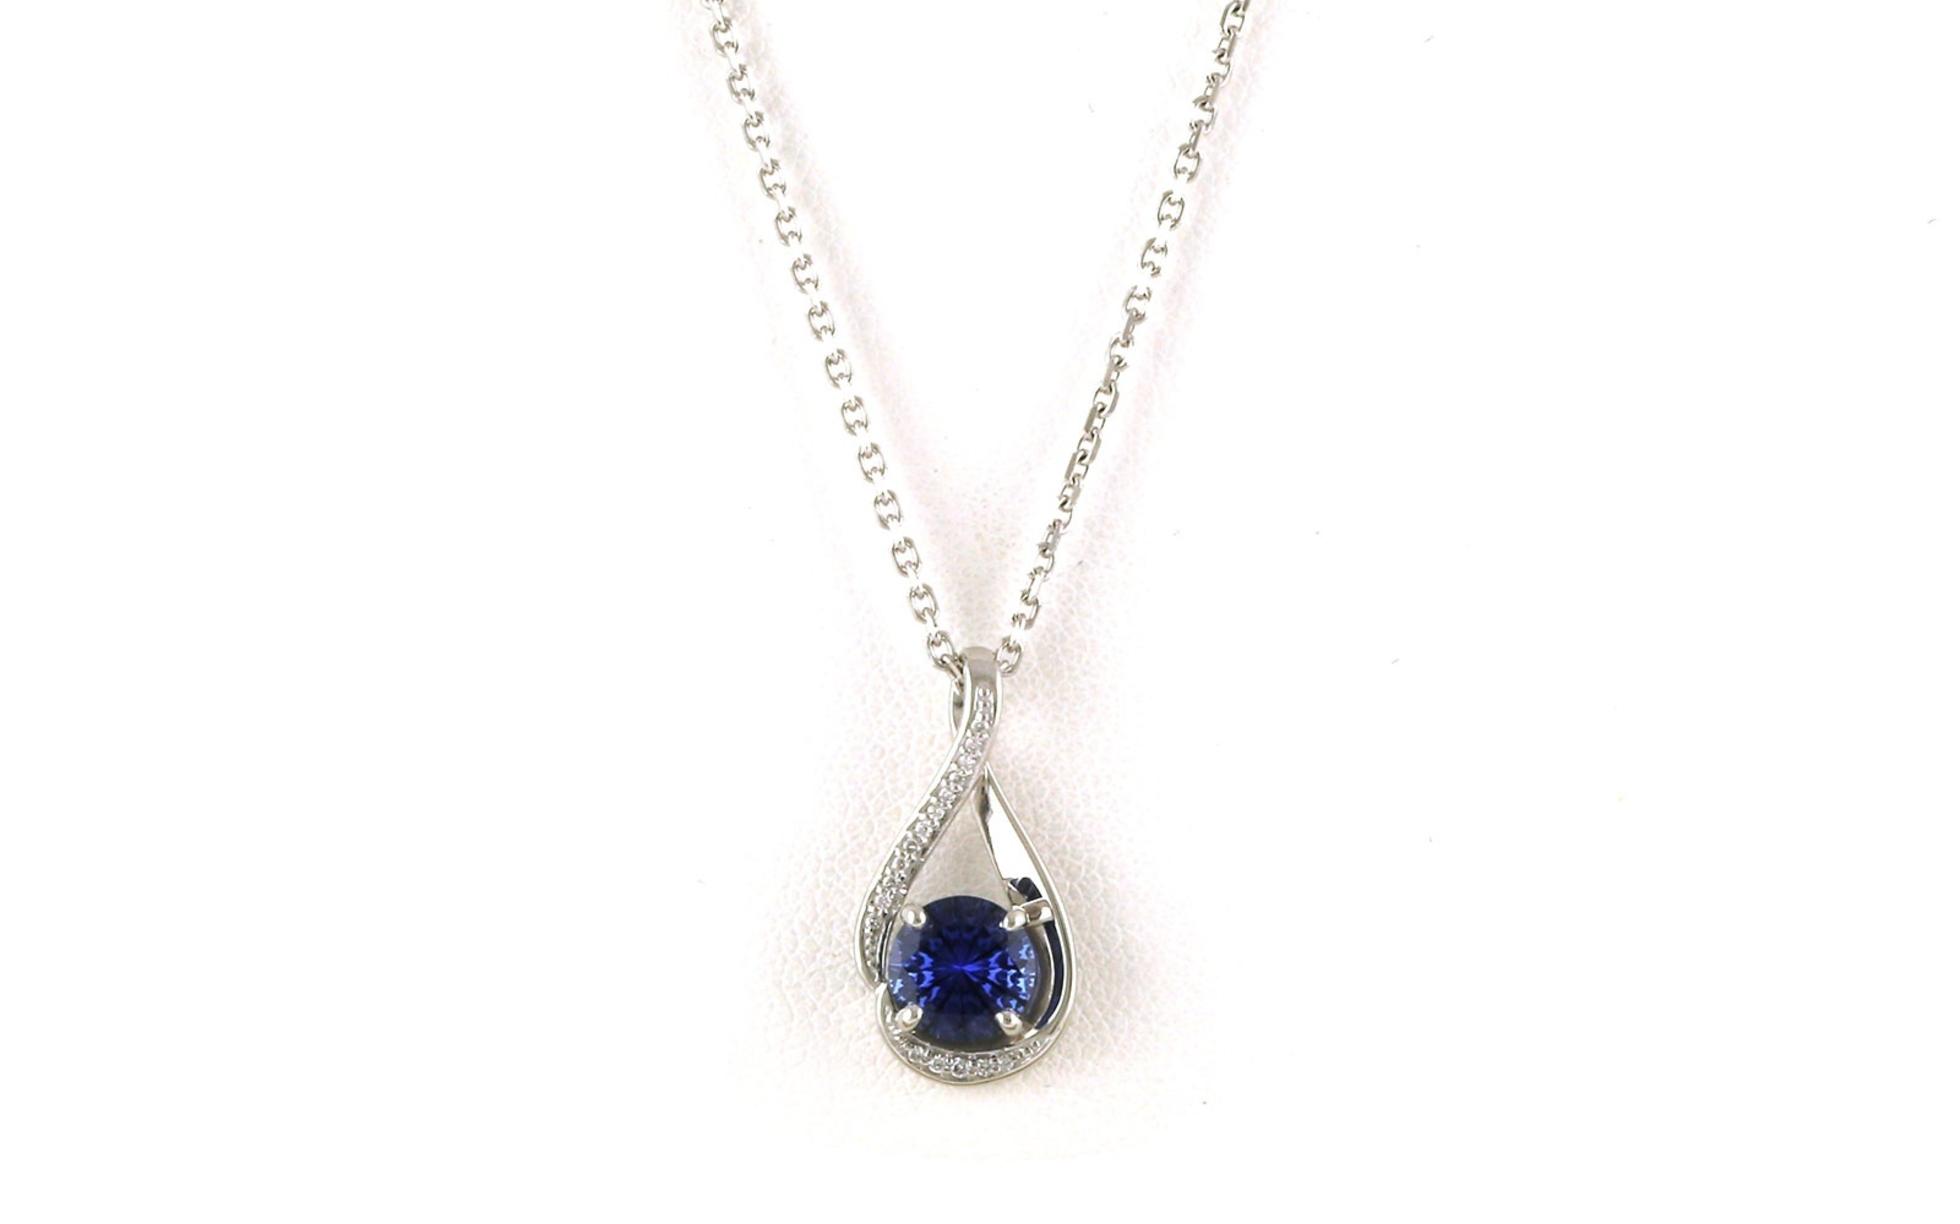 Teardrop Montana Yogo Sapphire and Pave Diamond Necklace in White Gold (1.35cts TWT)